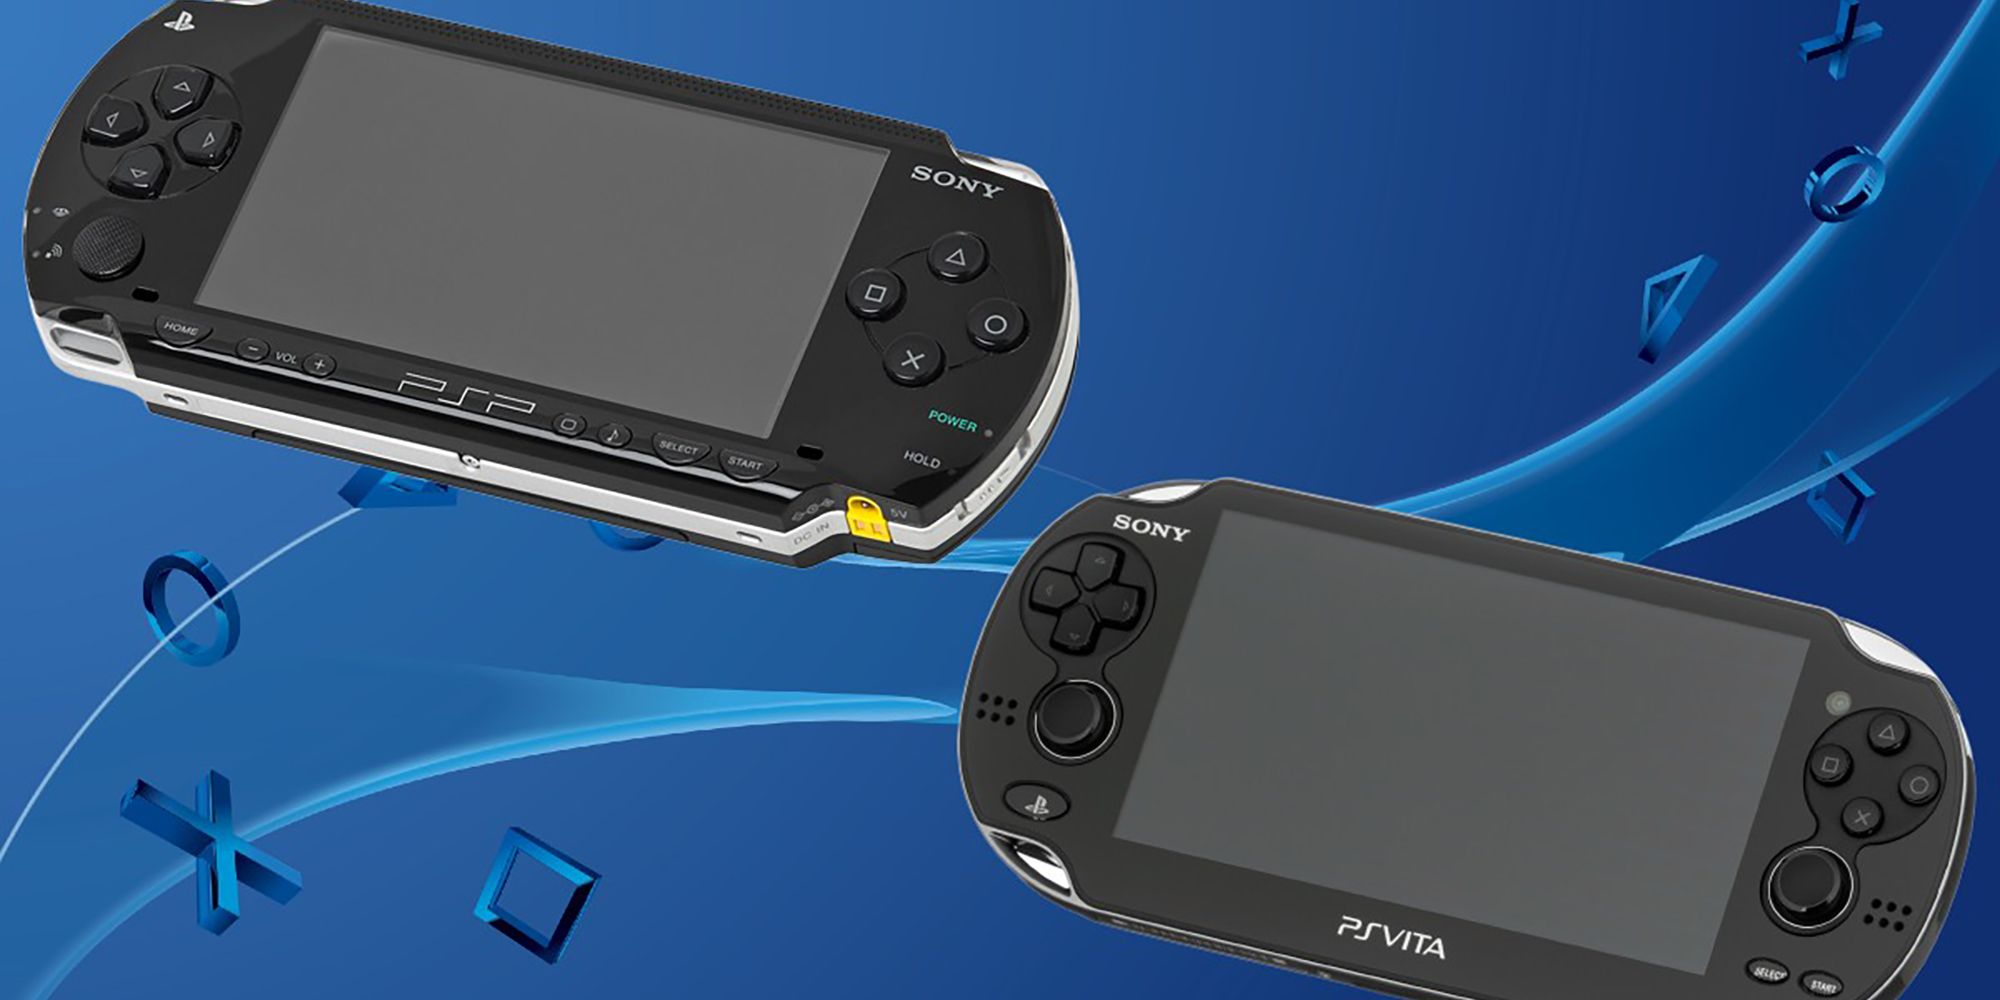 Could Sony's PSP be the Best Portable Game Console Ever?